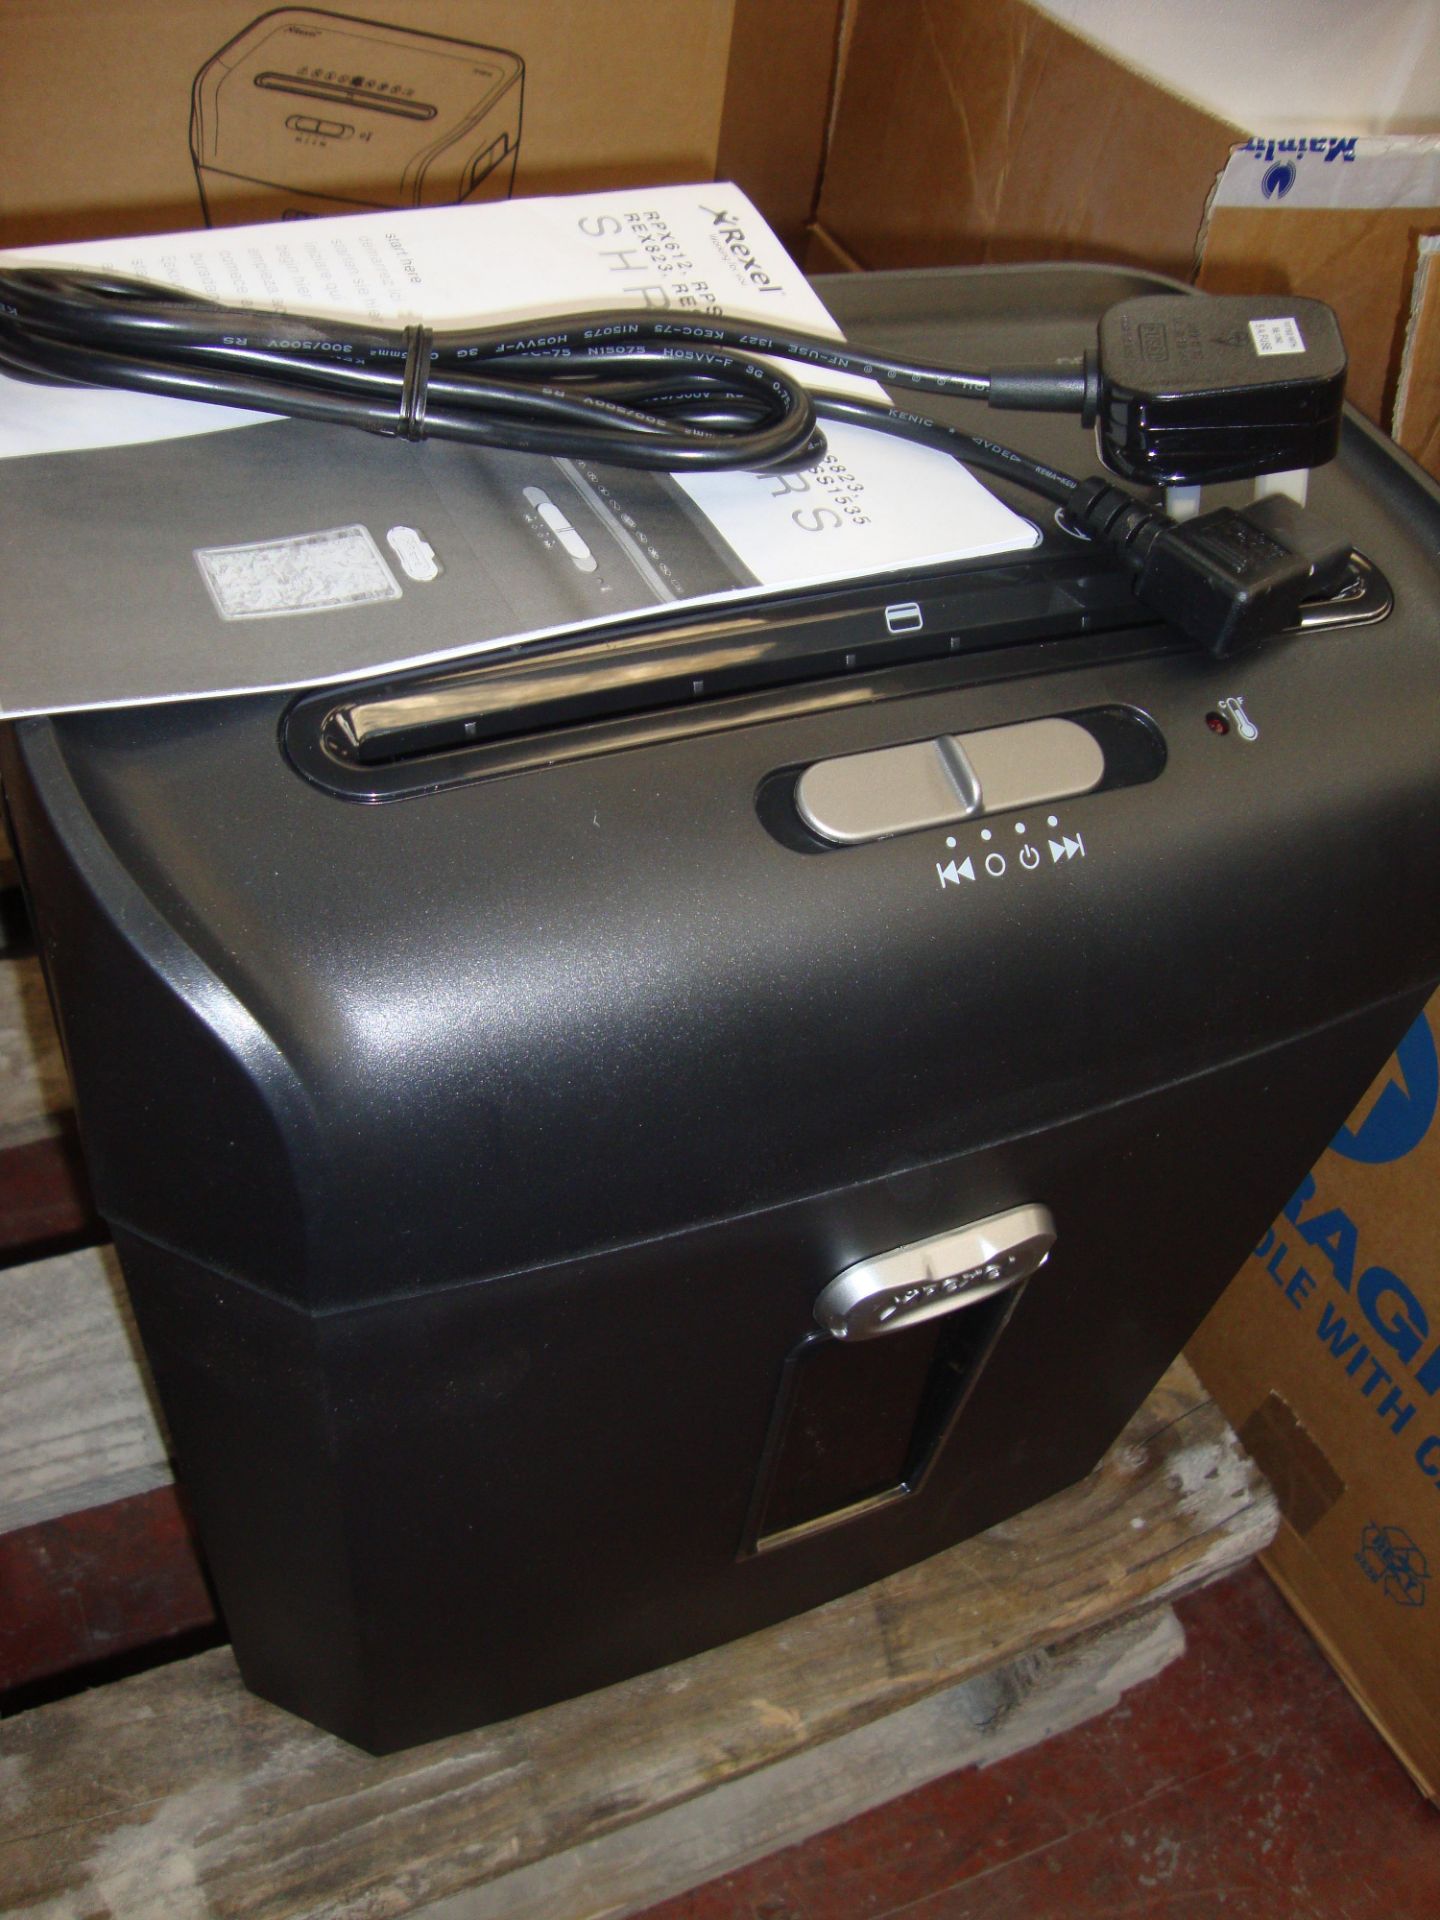 Rexel paper/office shredder model Promax RPS812 - appears boxed, new and unused All the lots in this